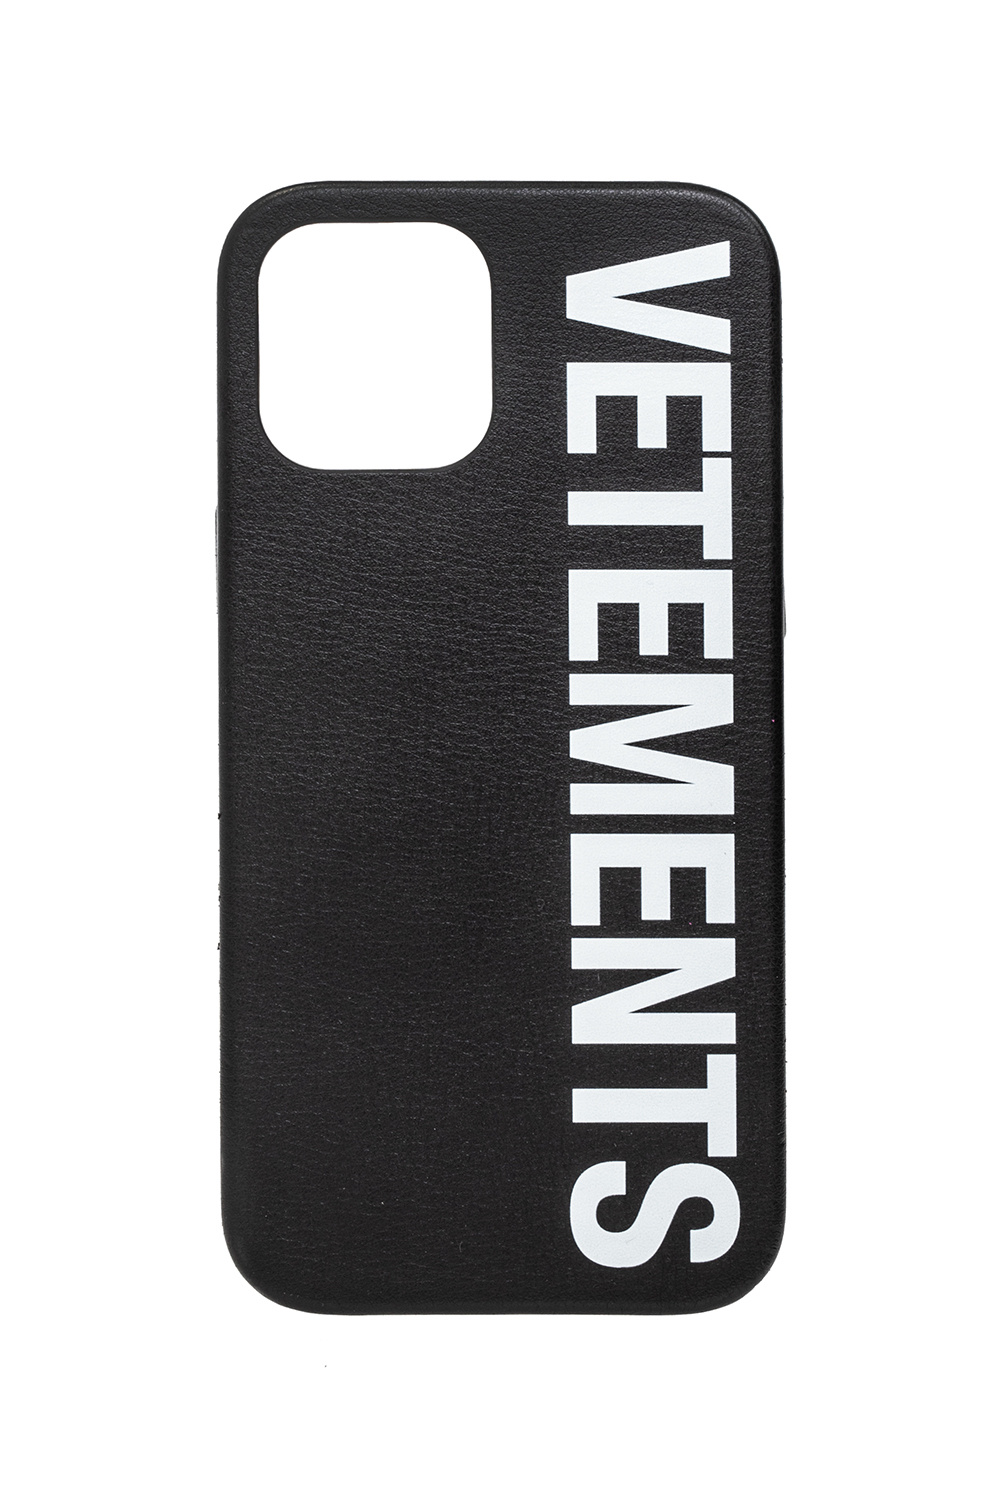 VETEMENTS Stay one step ahead and see the most stylish suggestions